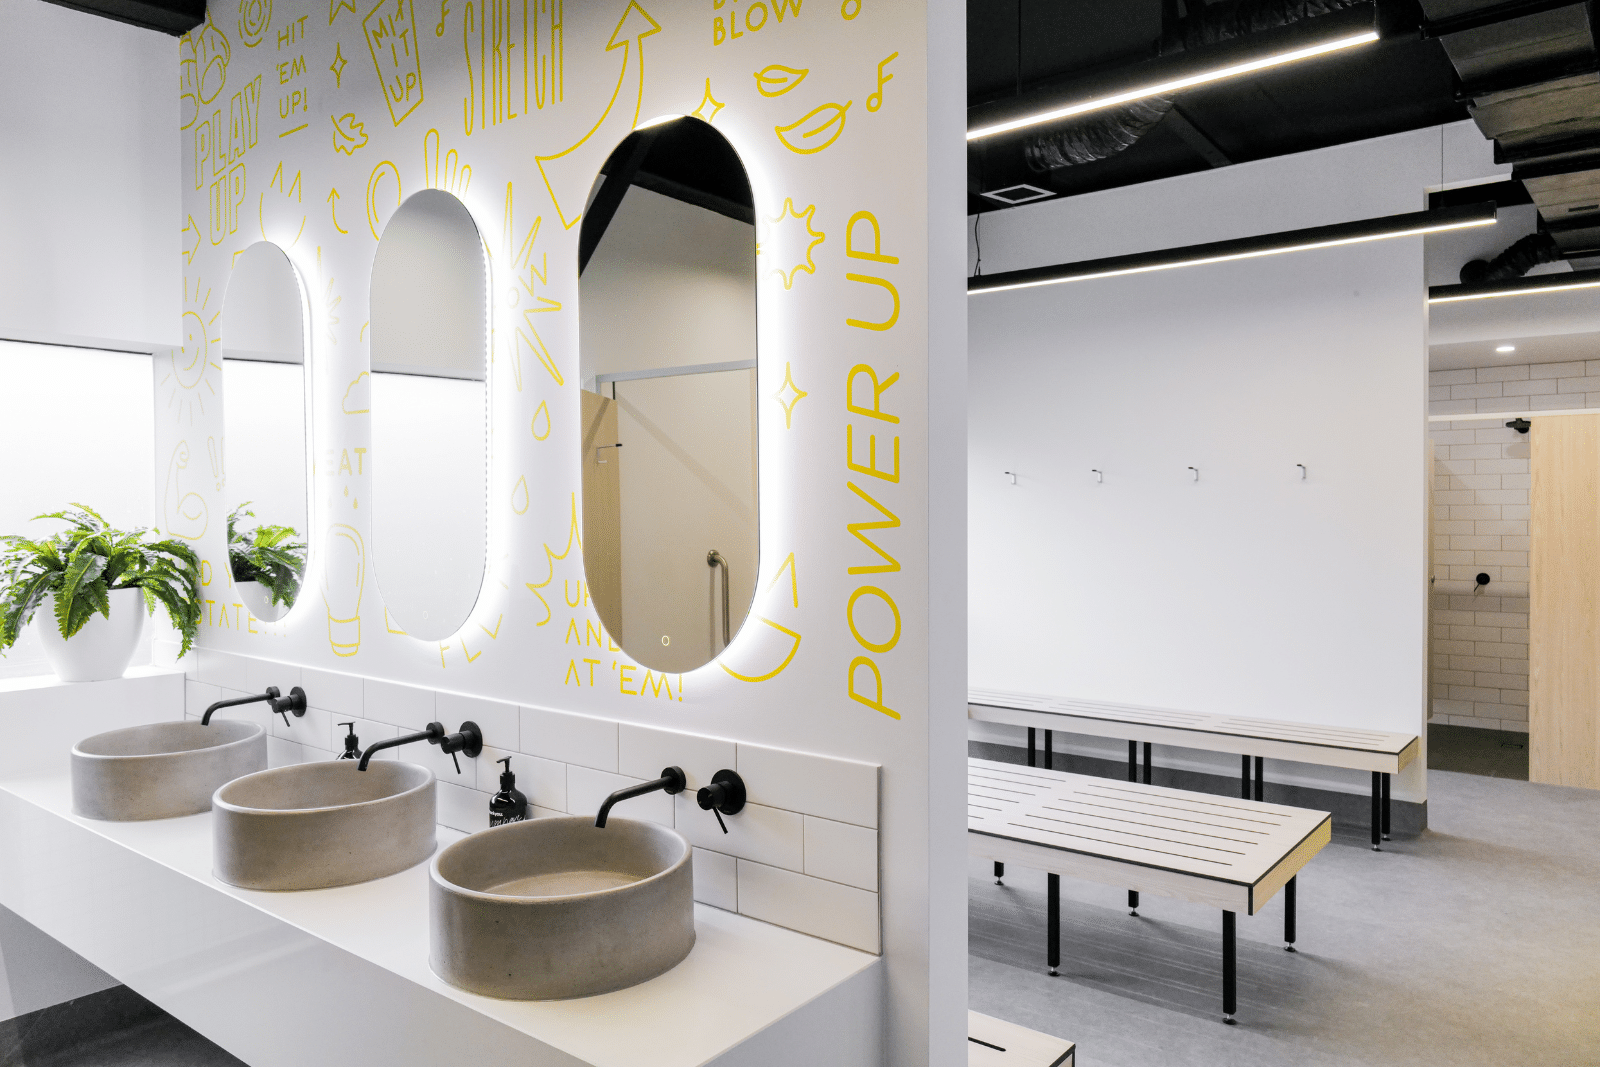 Chic, fresh changerooms at Upstate Studios fitness studios. Bright interior with pops of yellow colour create an uplifting atmosphere after working out.